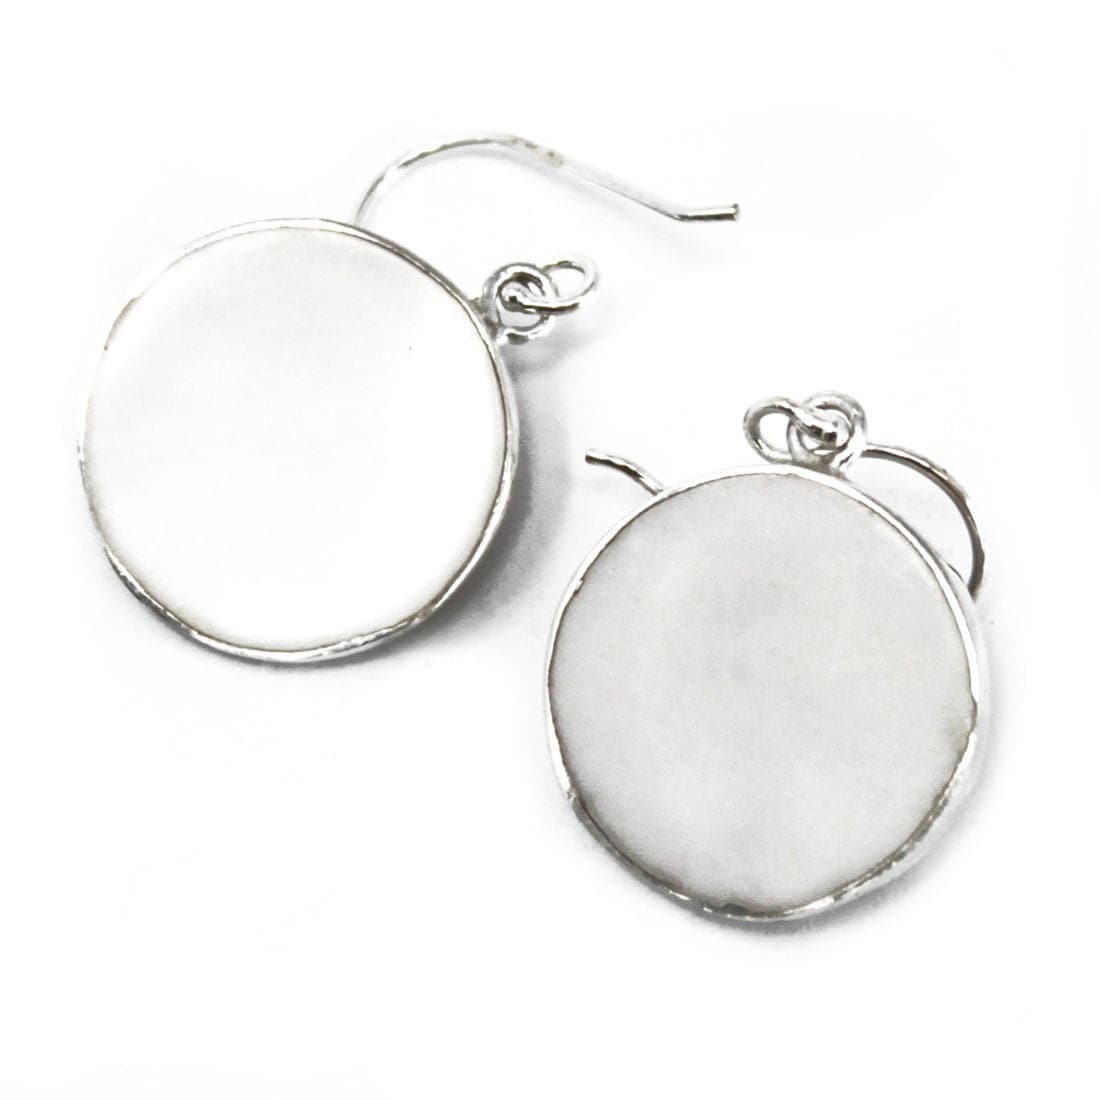 Tree of Life Silver Earrings 15mm - Mother of Pearl - best price from Maltashopper.com TOLSP-09